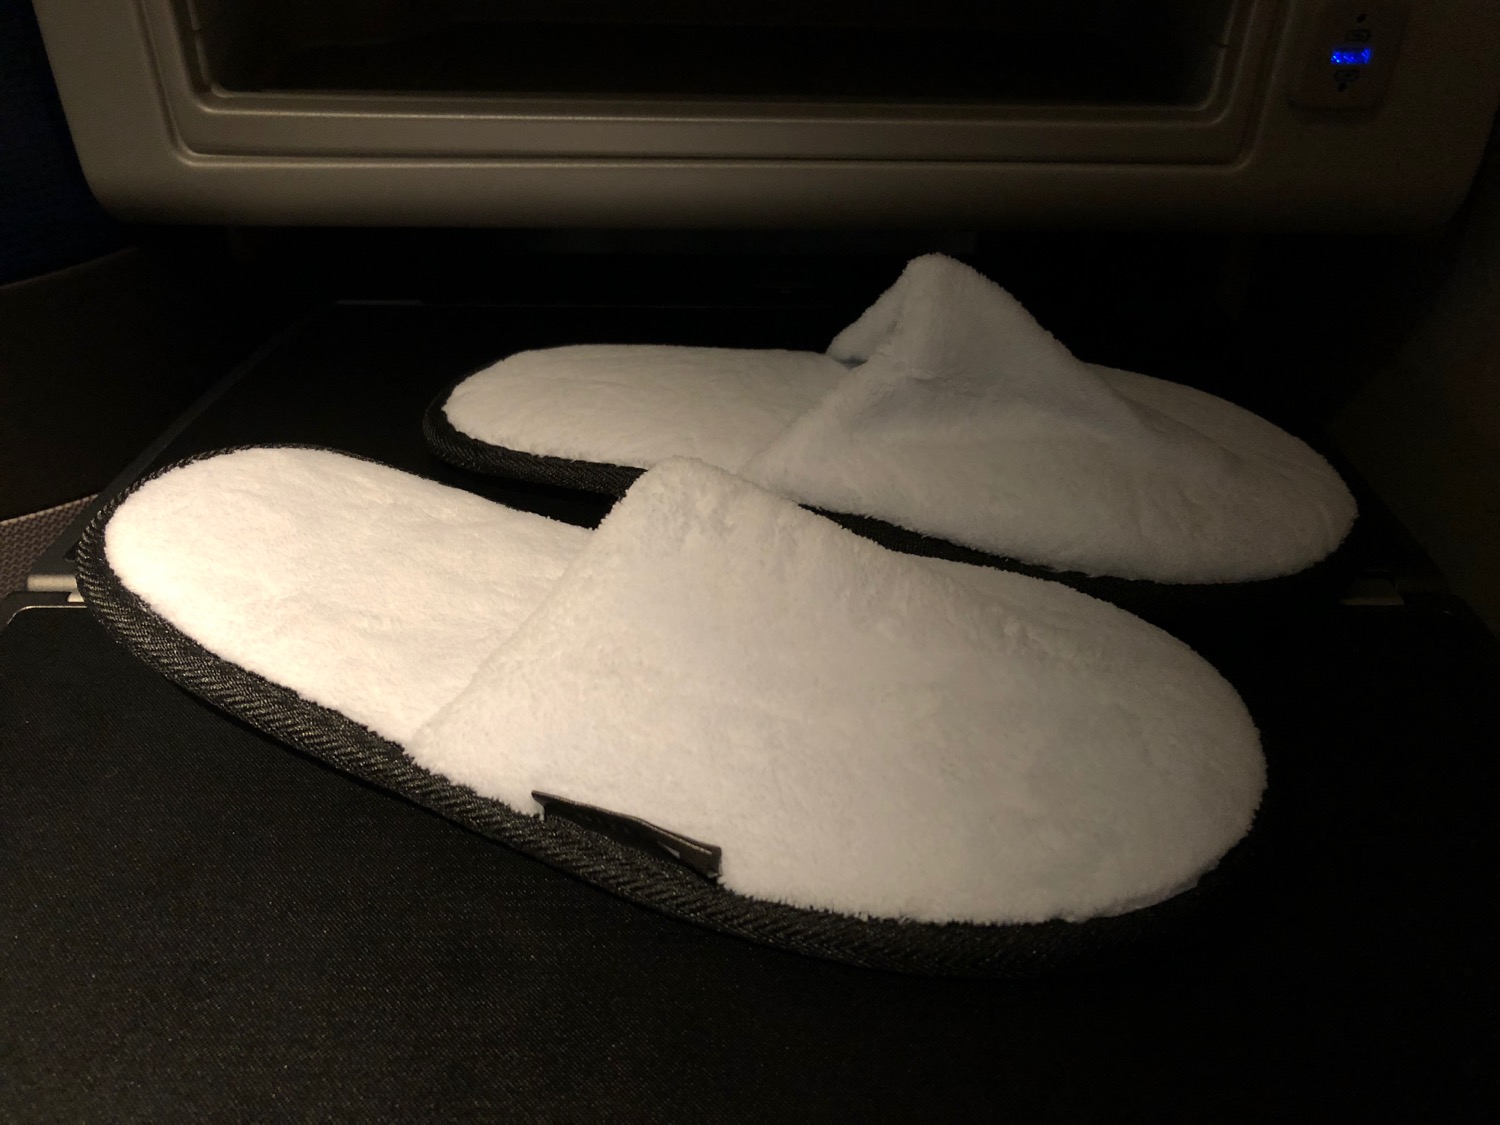 a pair of white slippers in a microwave